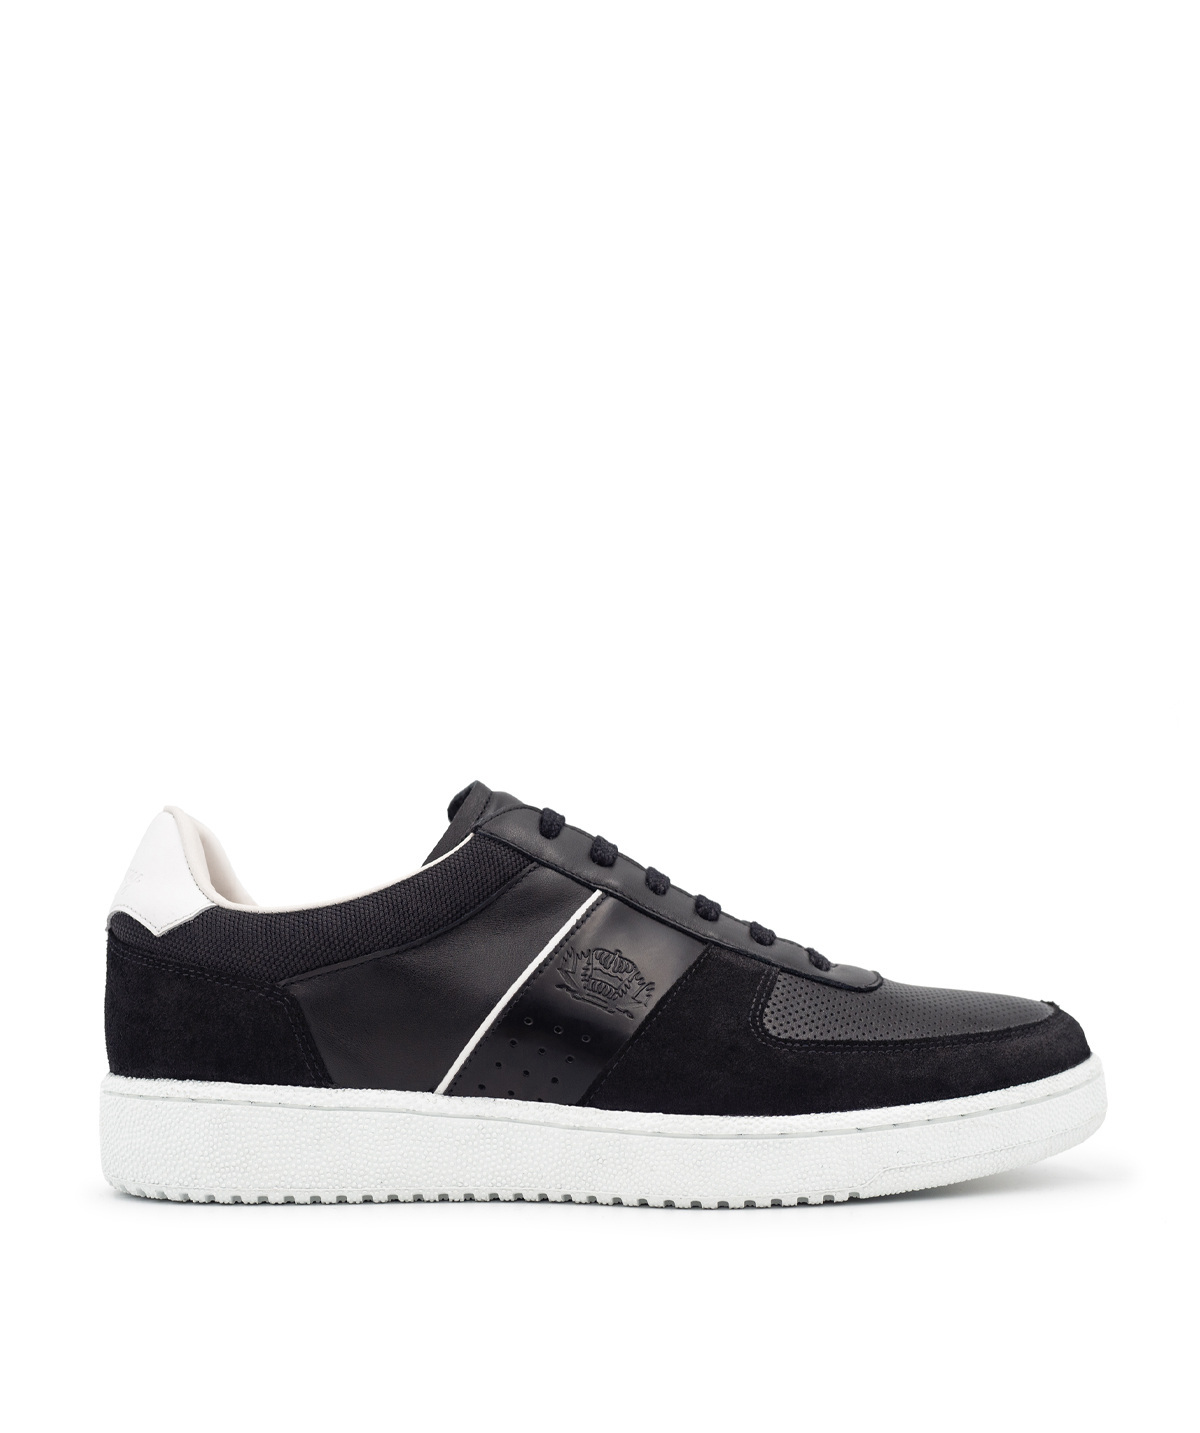 Men's lace-up sneaker in black leather